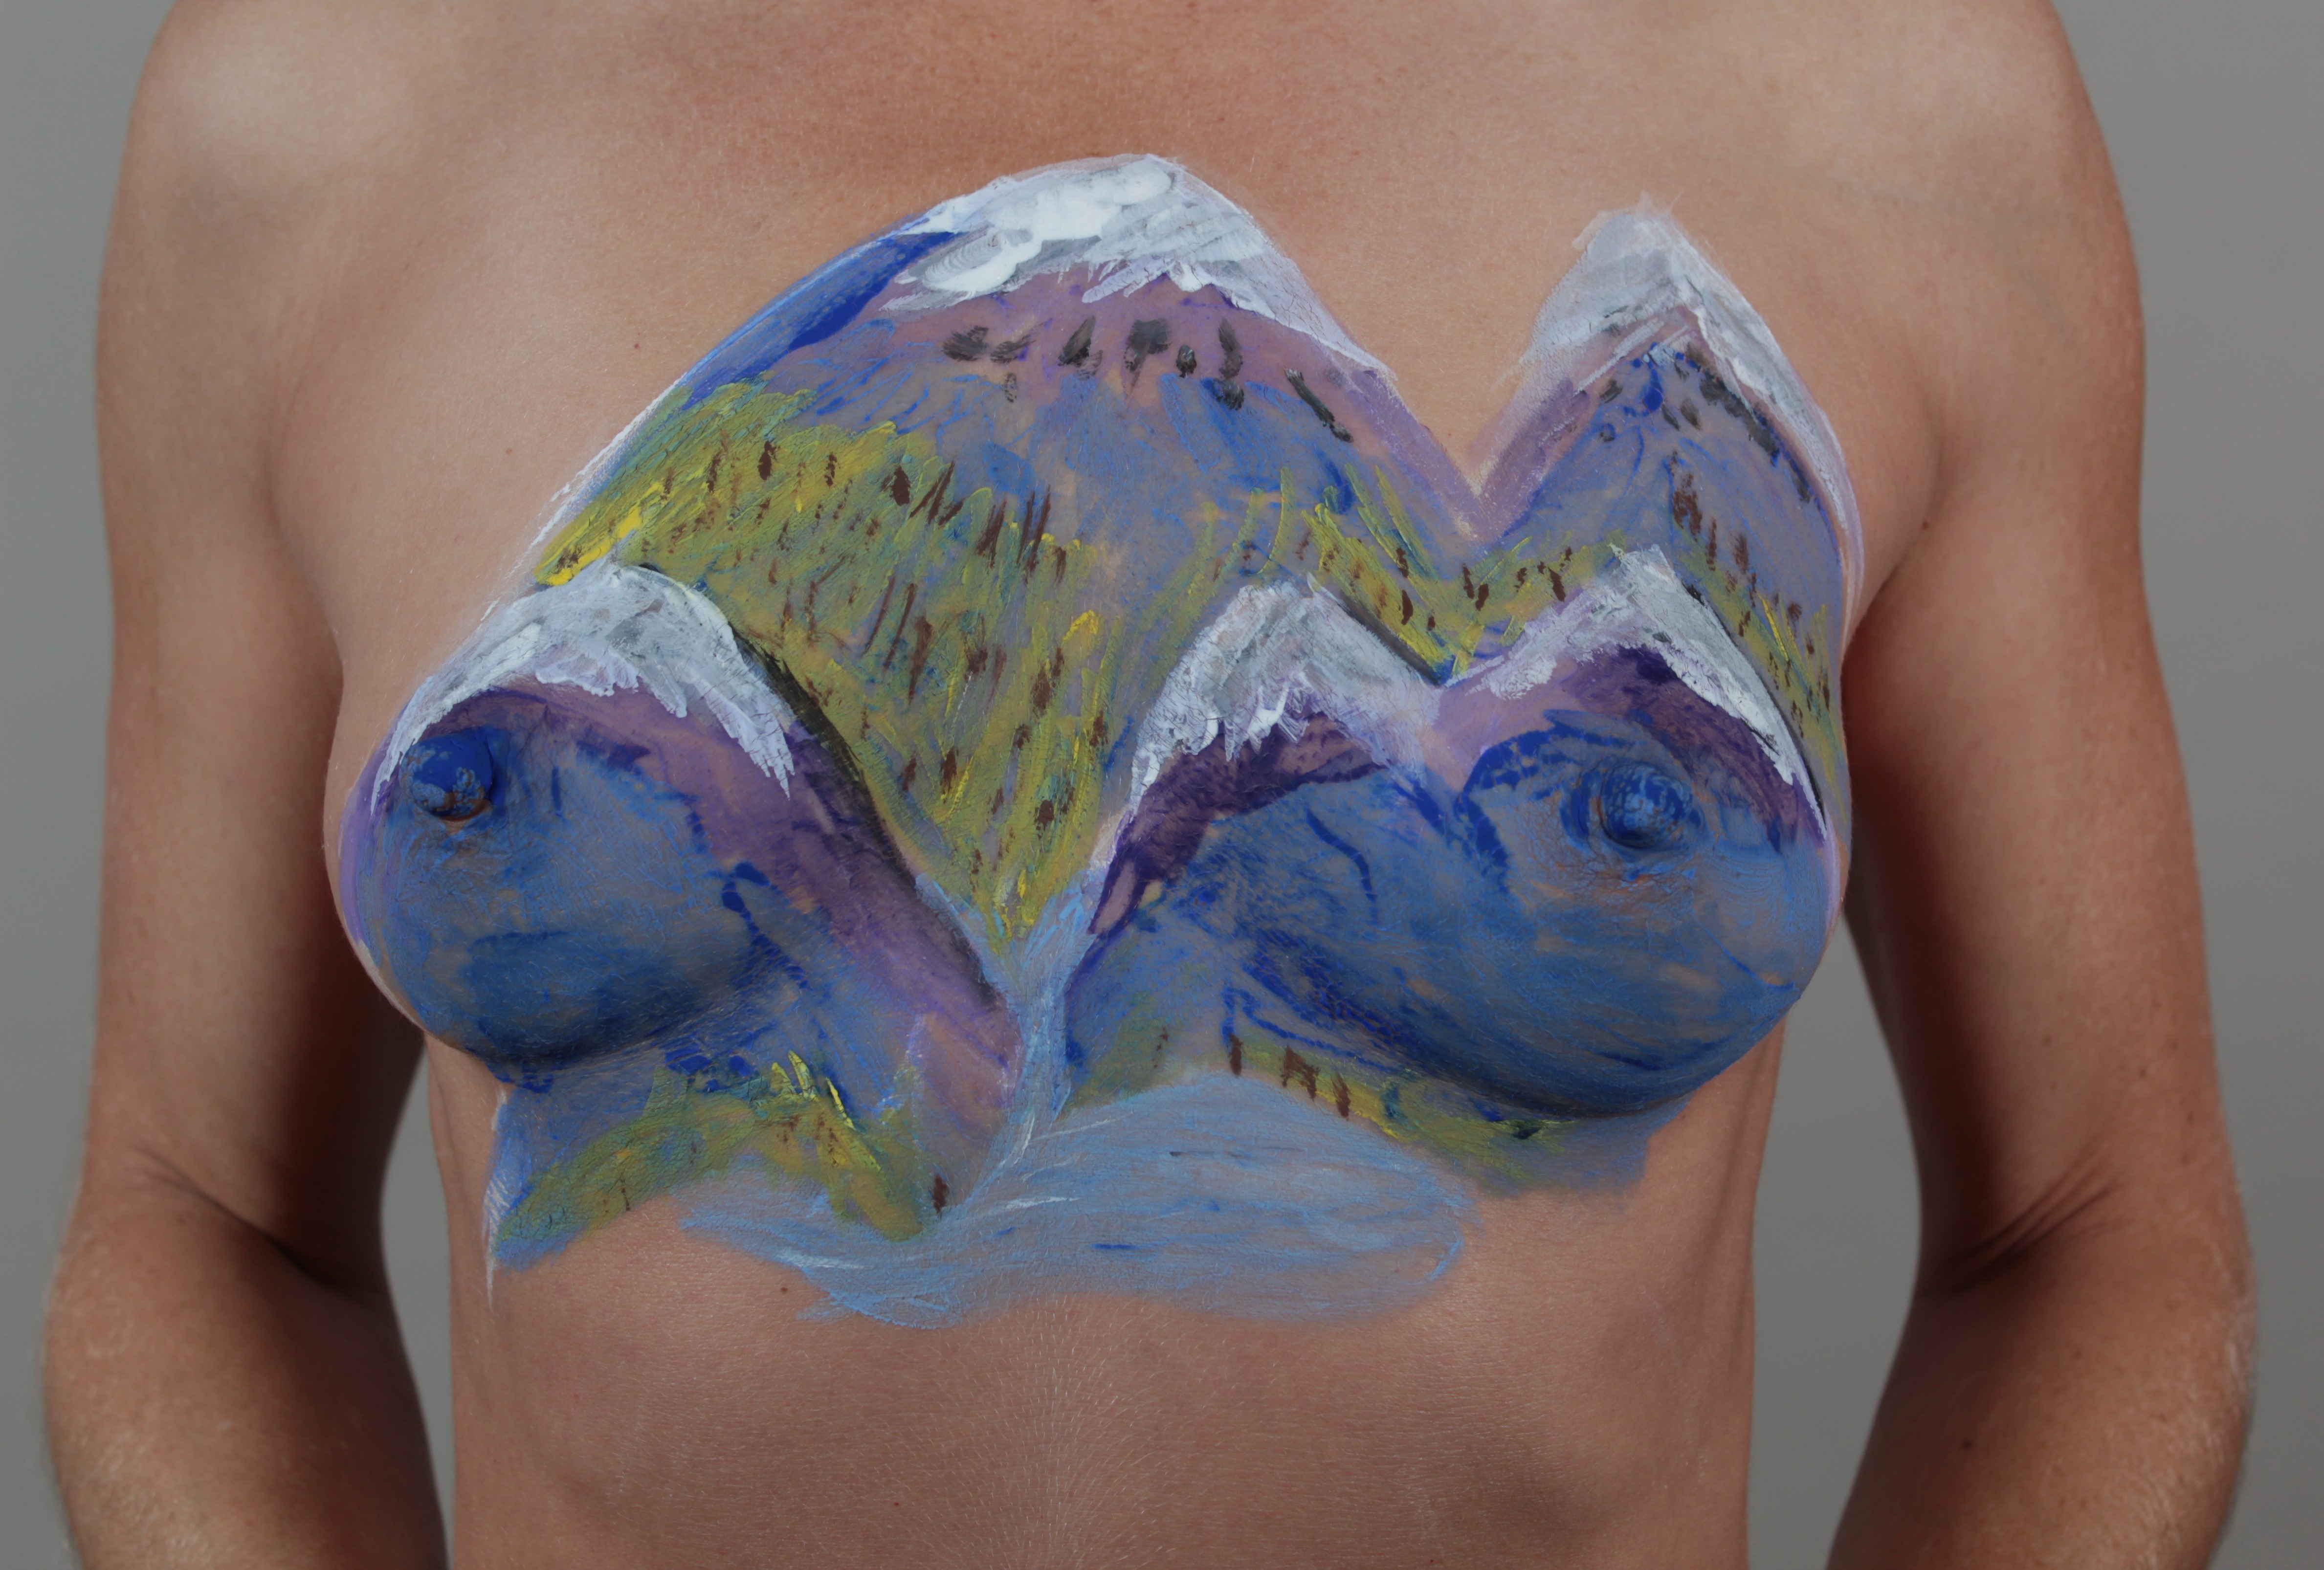 Range of mountains with a waterfall leading to a river on woman's chest